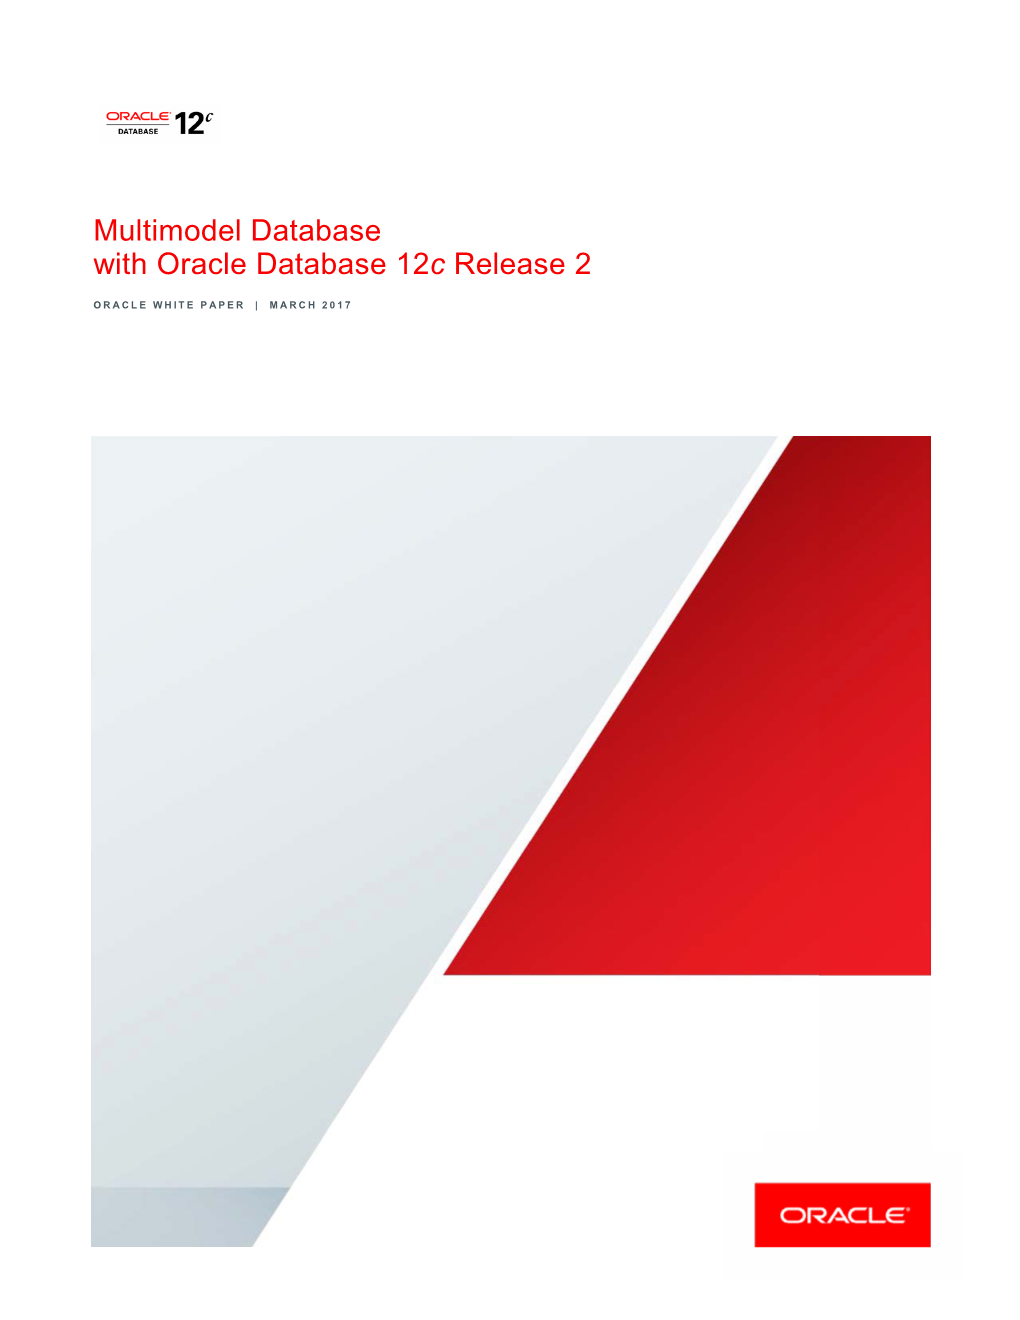 Multimodel Database with Oracle Database 12C Release 2